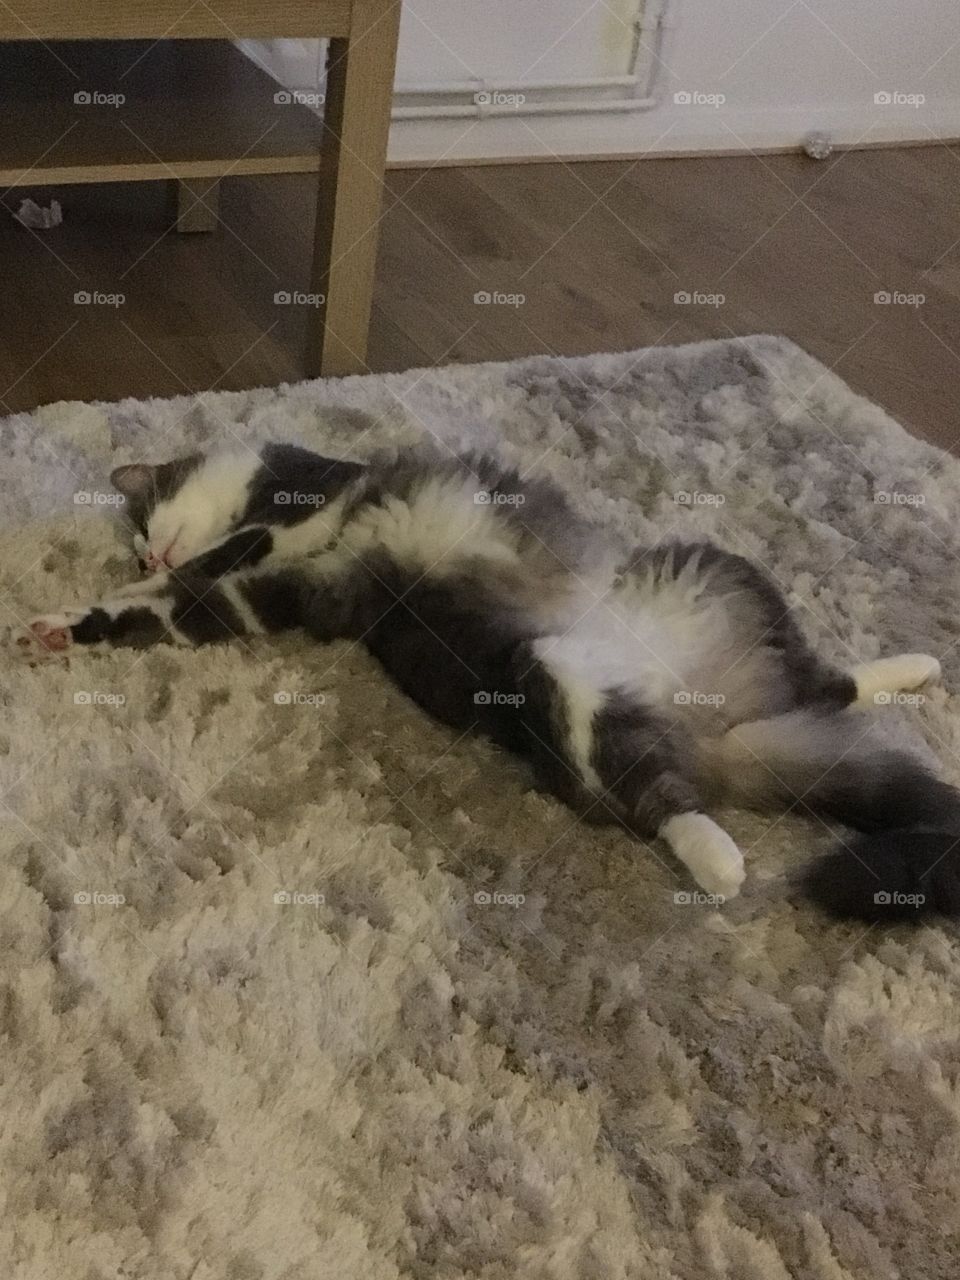 Lazy cat stretched out on the rug